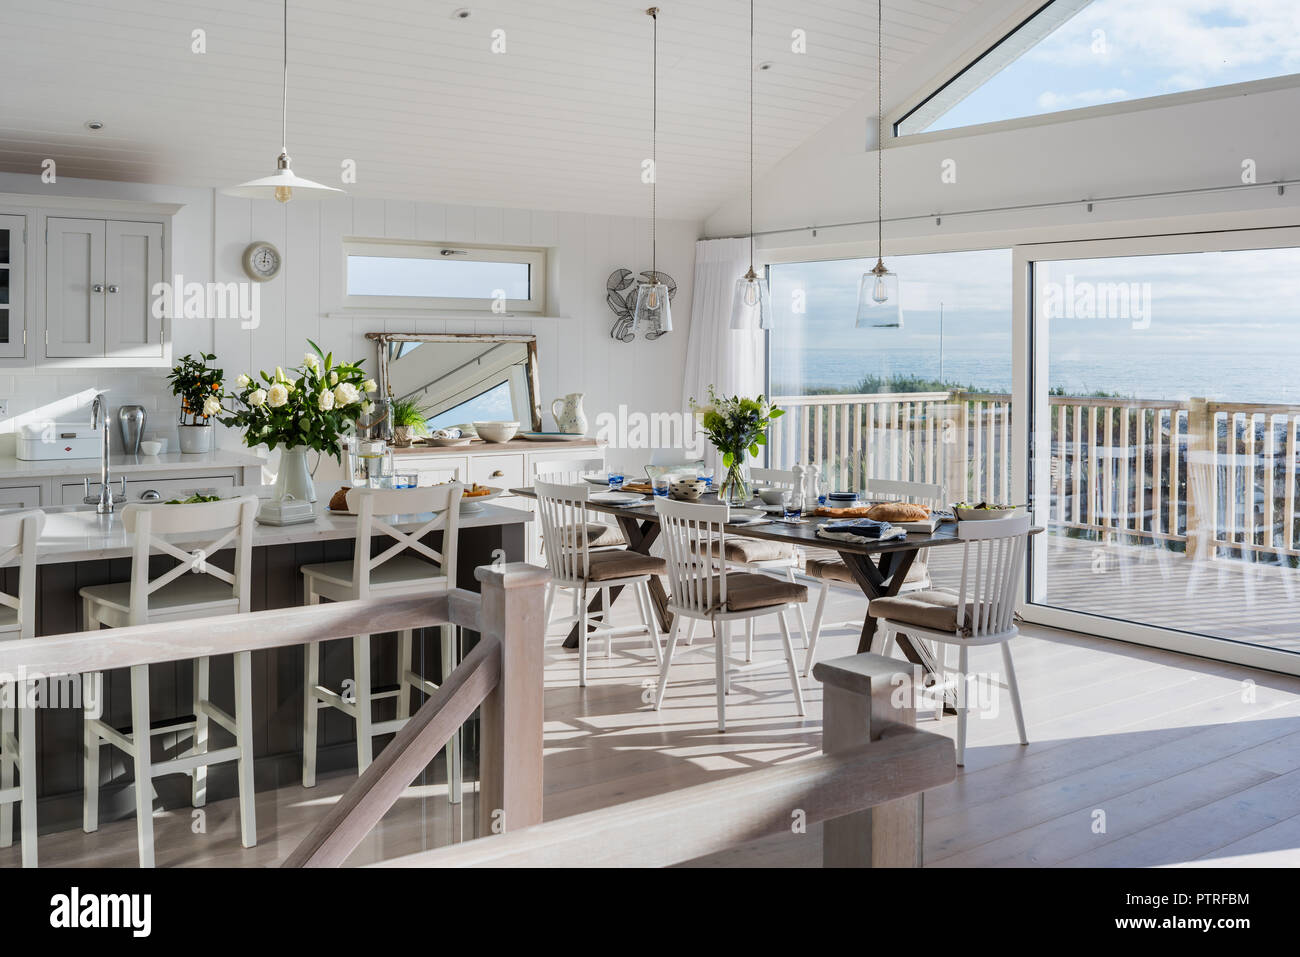 Open plan kitchen and dining room with sea views Stock Photo